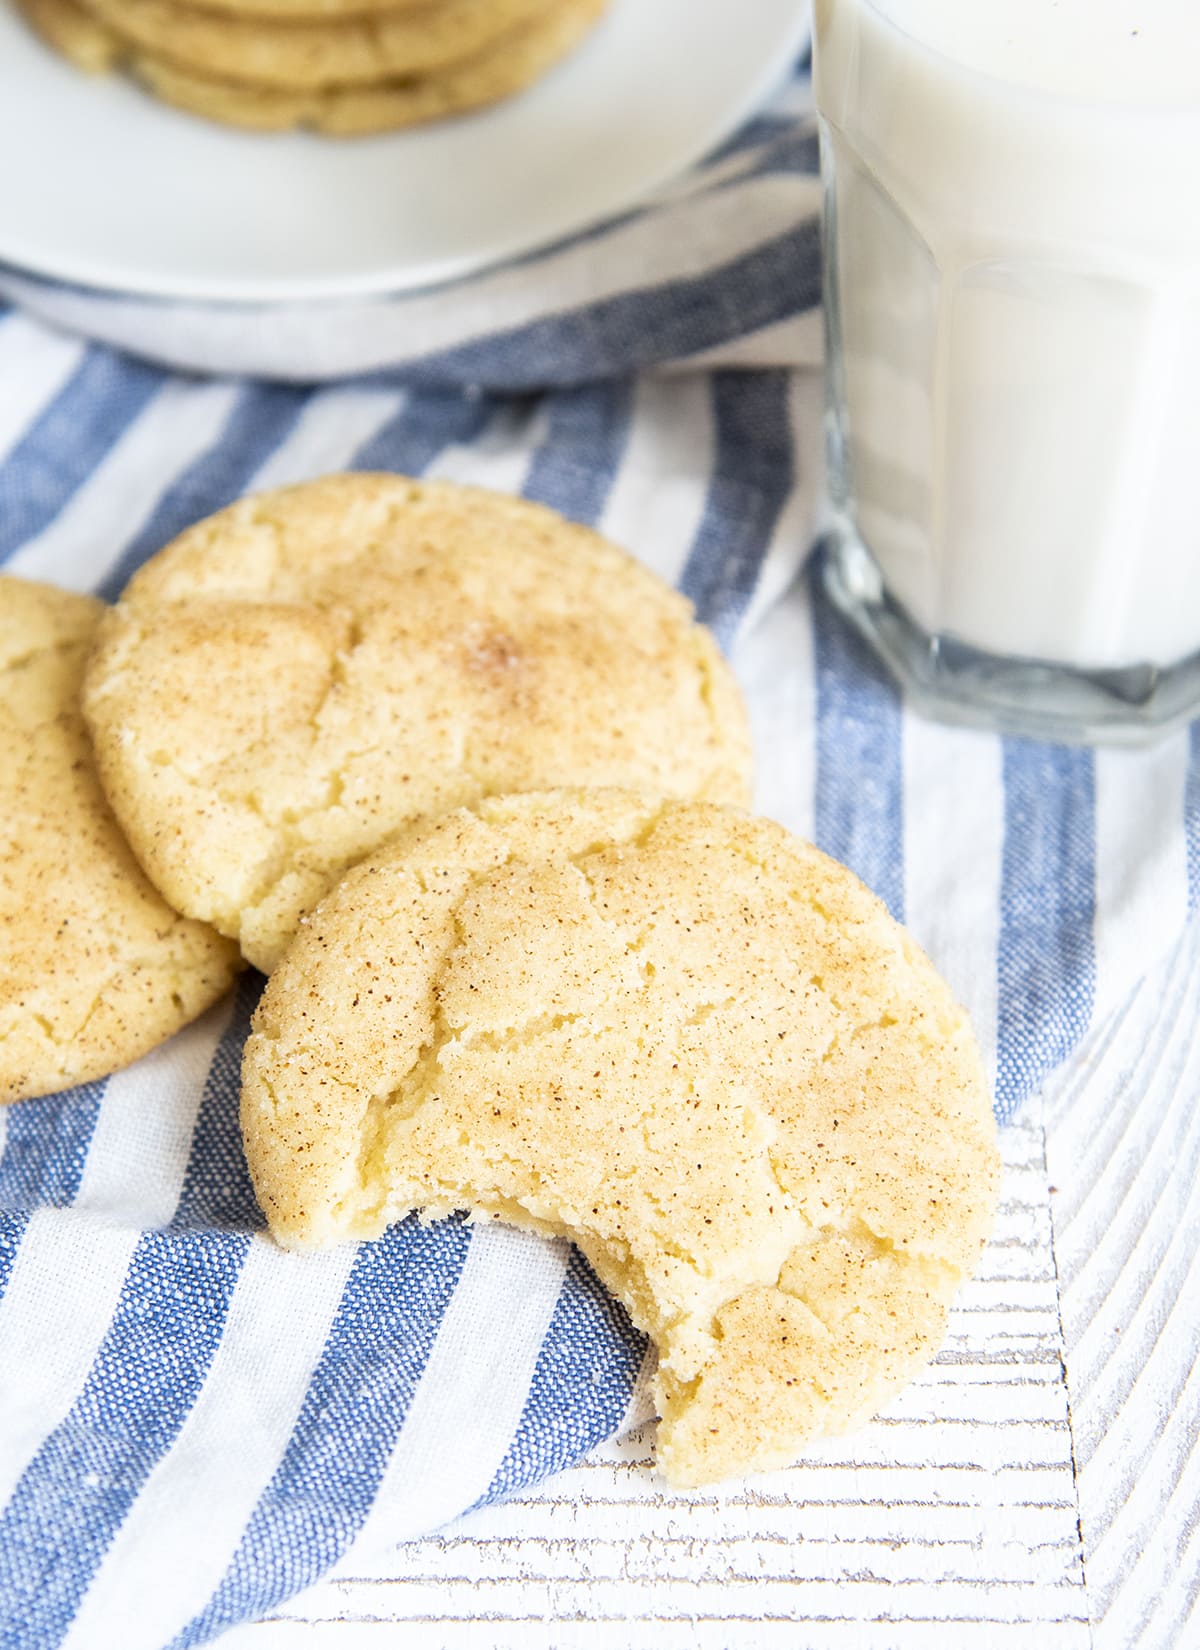 Snickerdoodle cookies on a blue and white cloth, one cookie has a bite out of it.